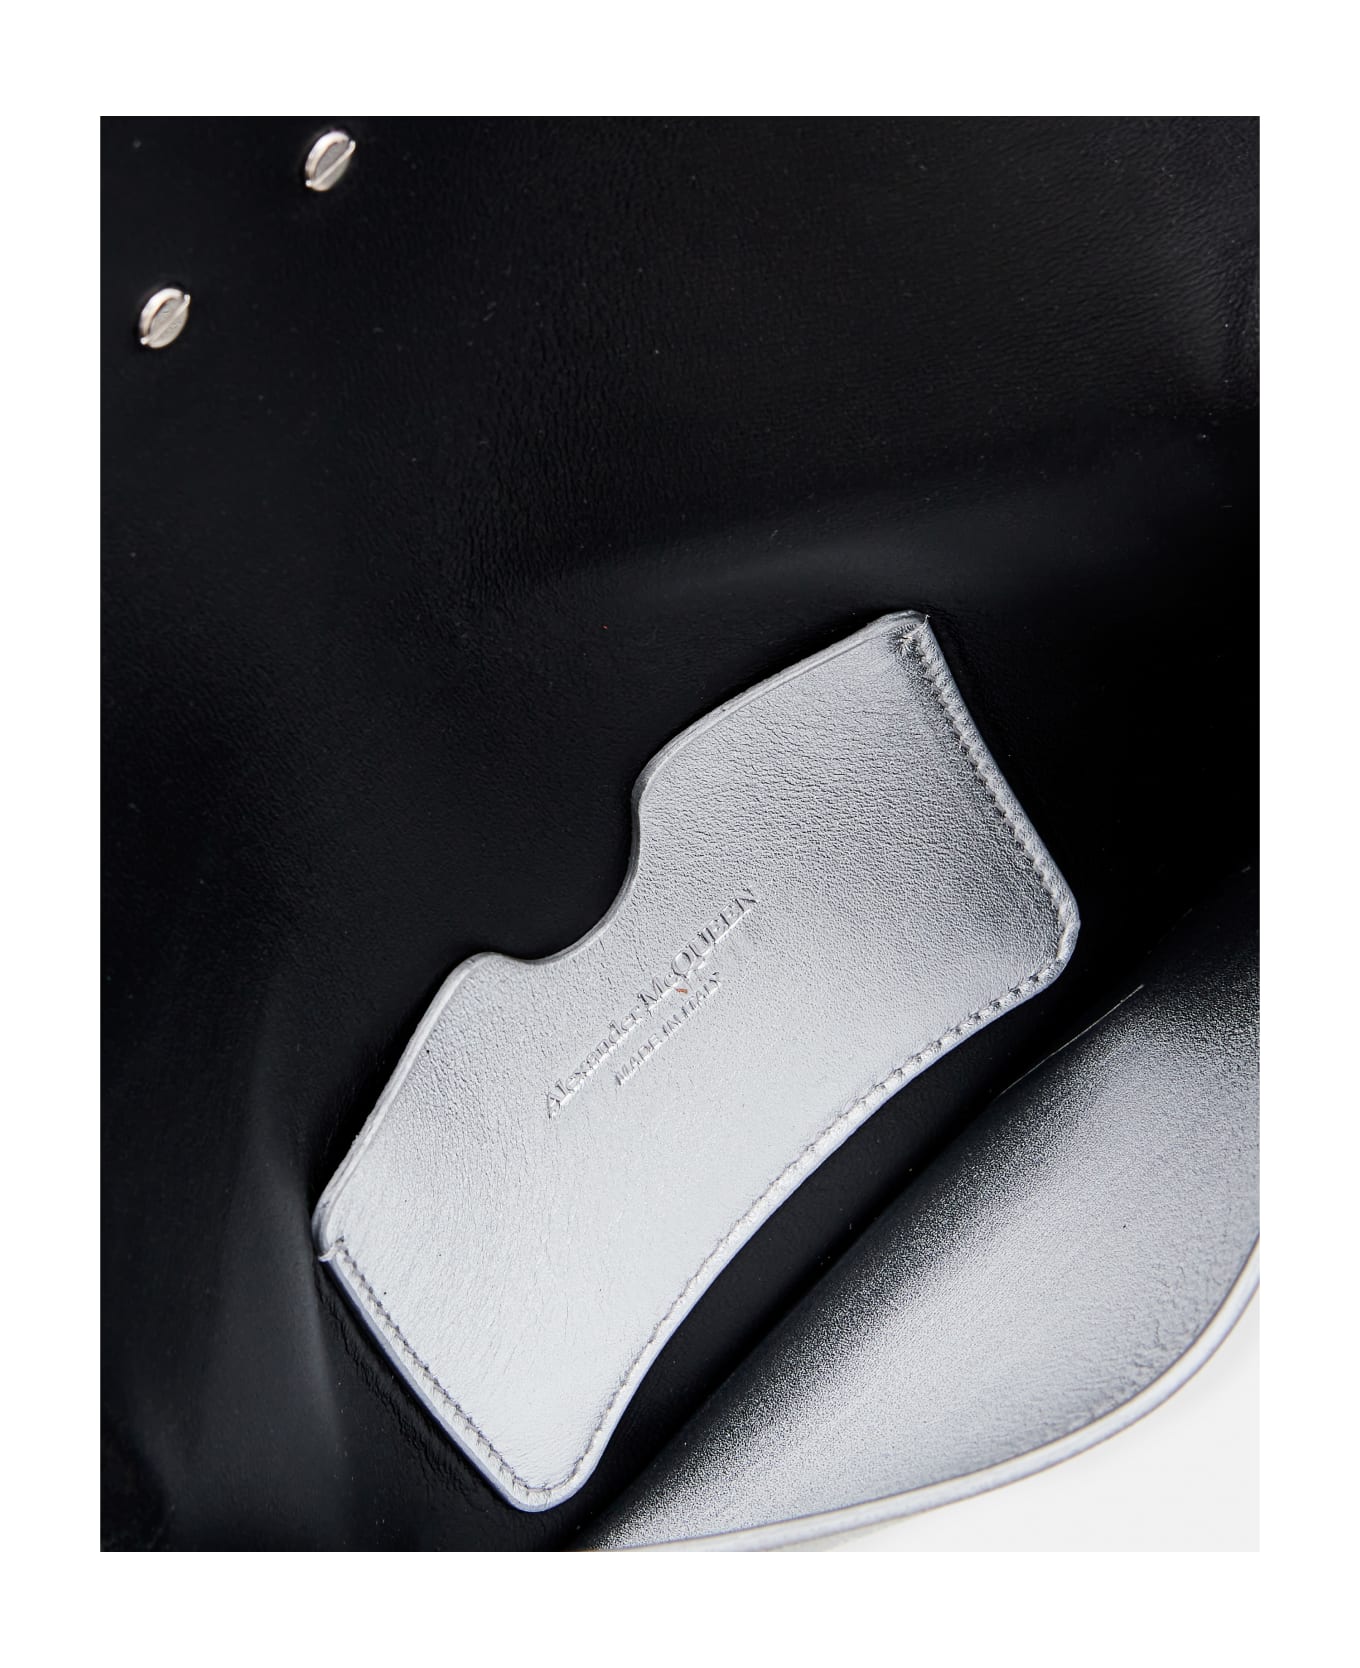 Alexander McQueen Seal Leather Phone Holder - Light Silver クラッチバッグ